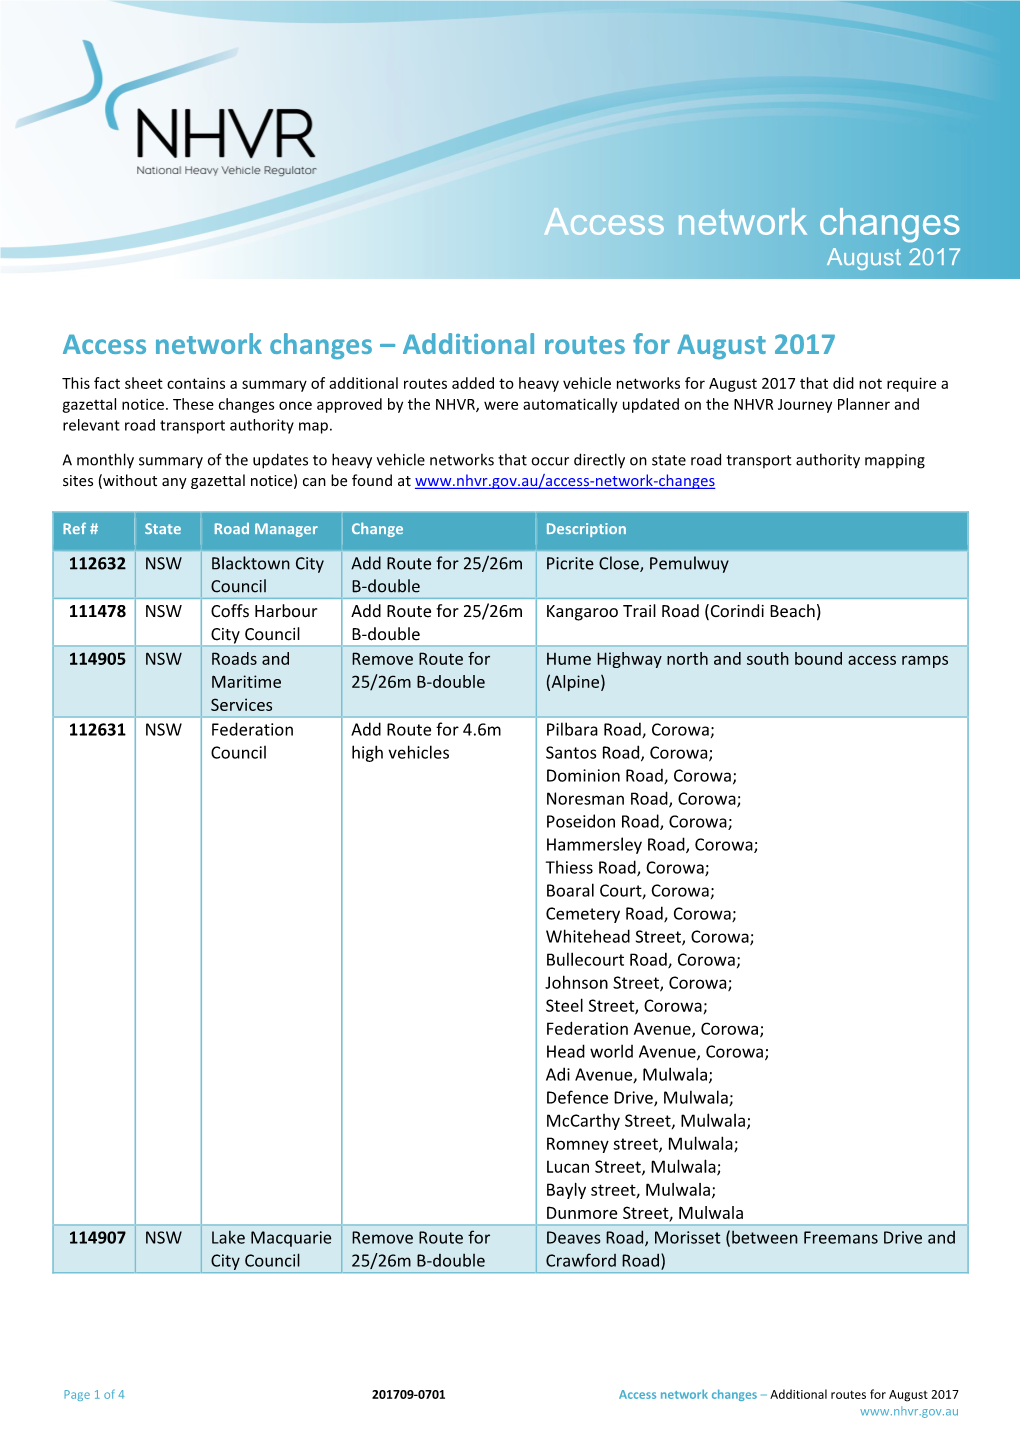 Access Network Changes August 2017